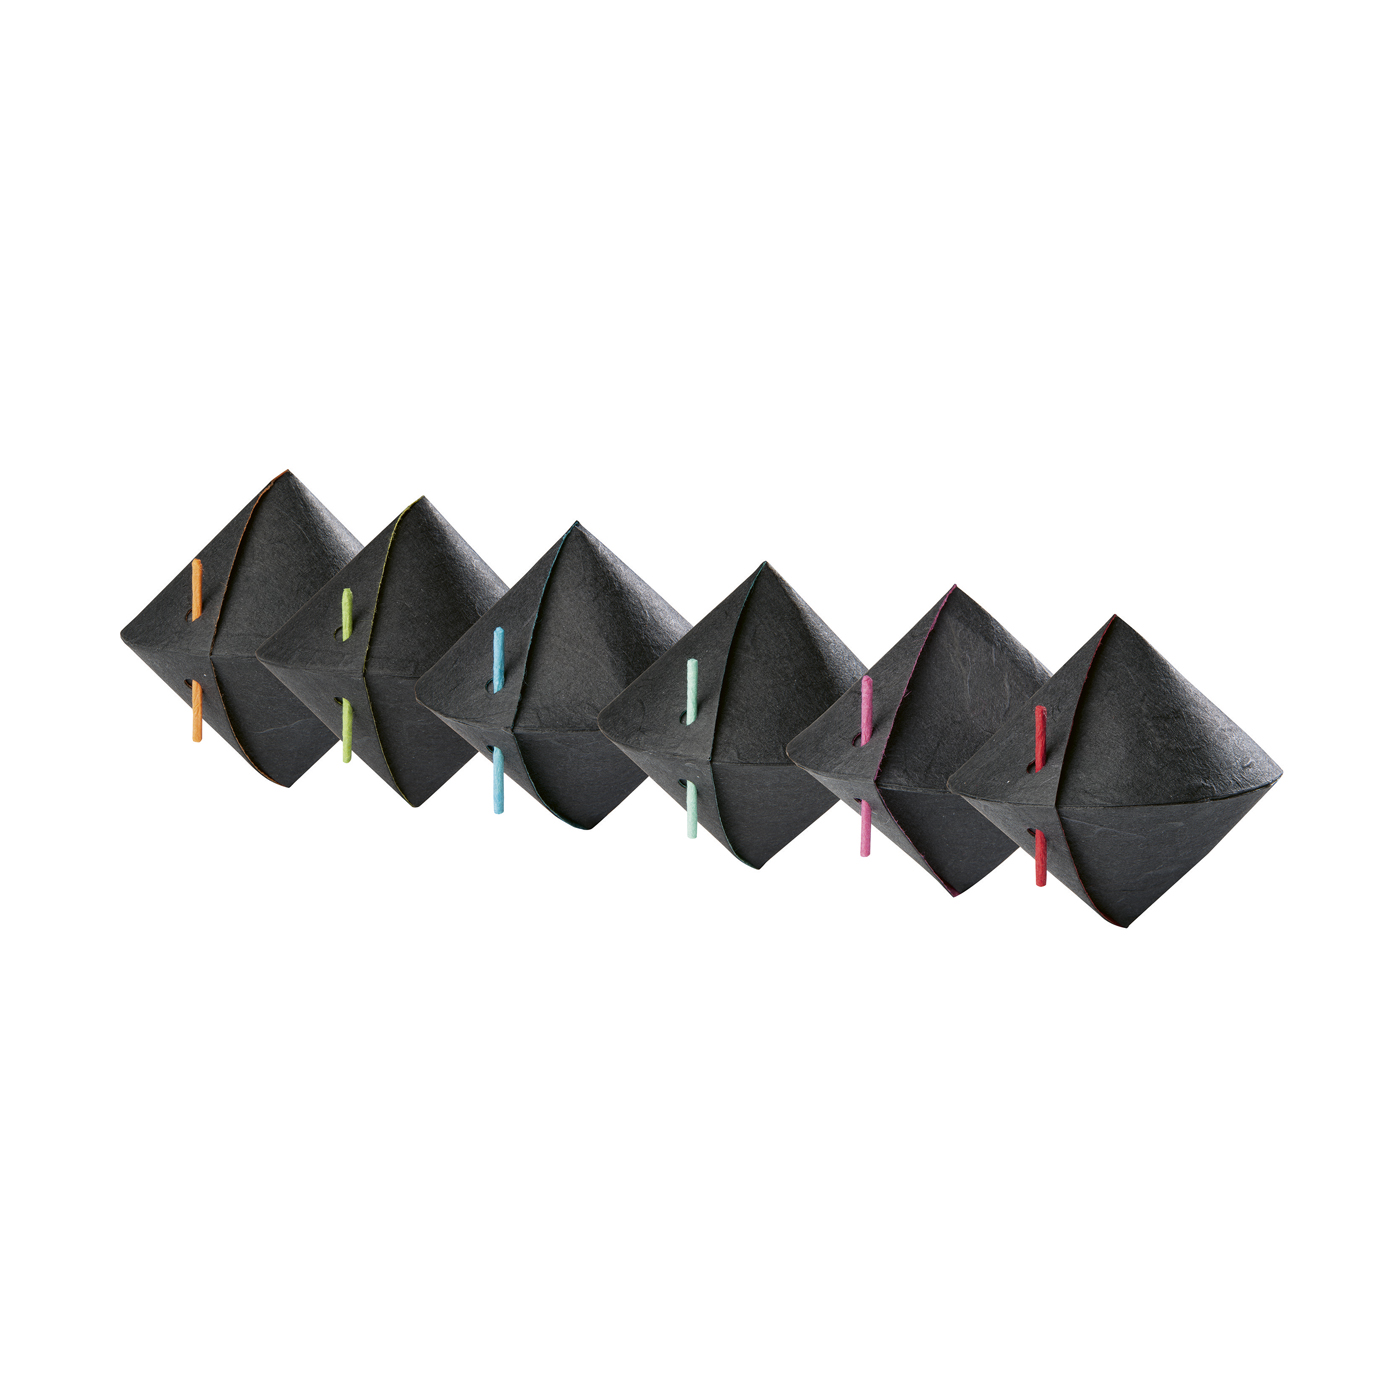 Jewellery Packagings "Pacbox", Black/Multicoloured, ø 80 mm - 6 pieces